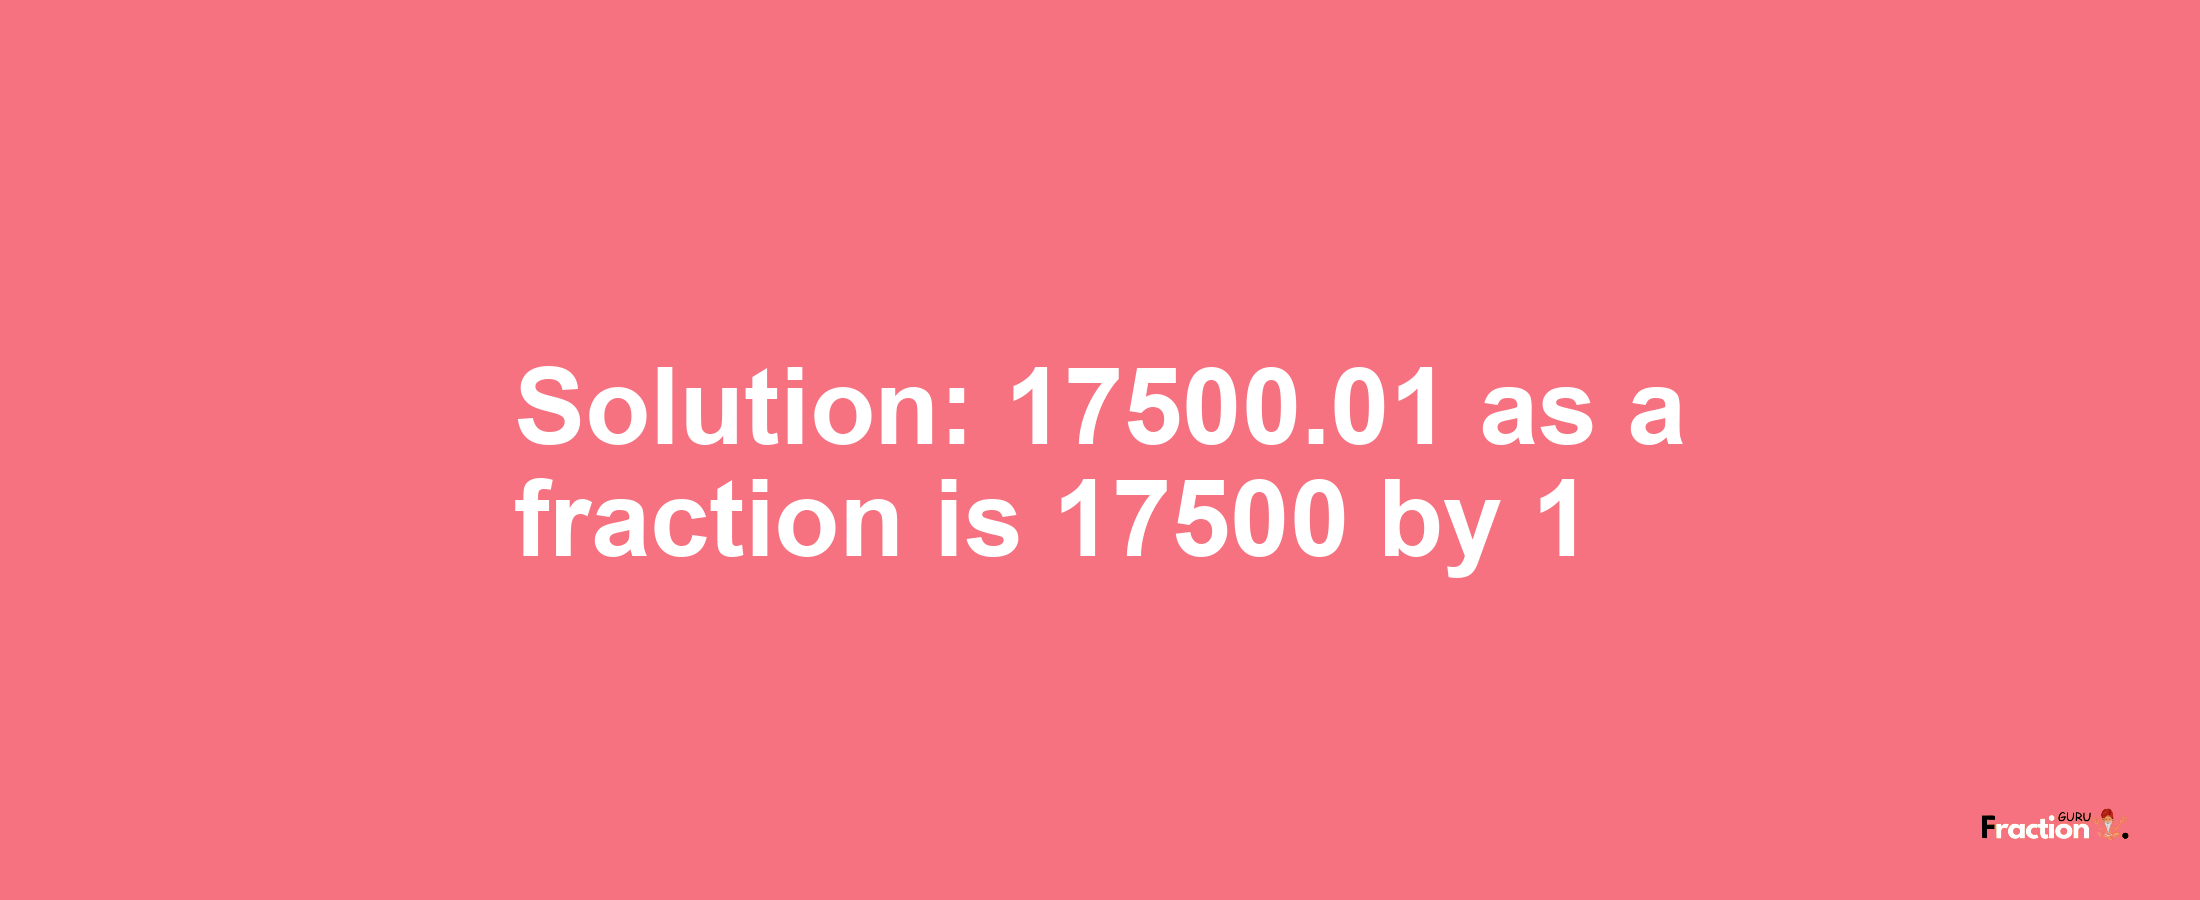 Solution:17500.01 as a fraction is 17500/1